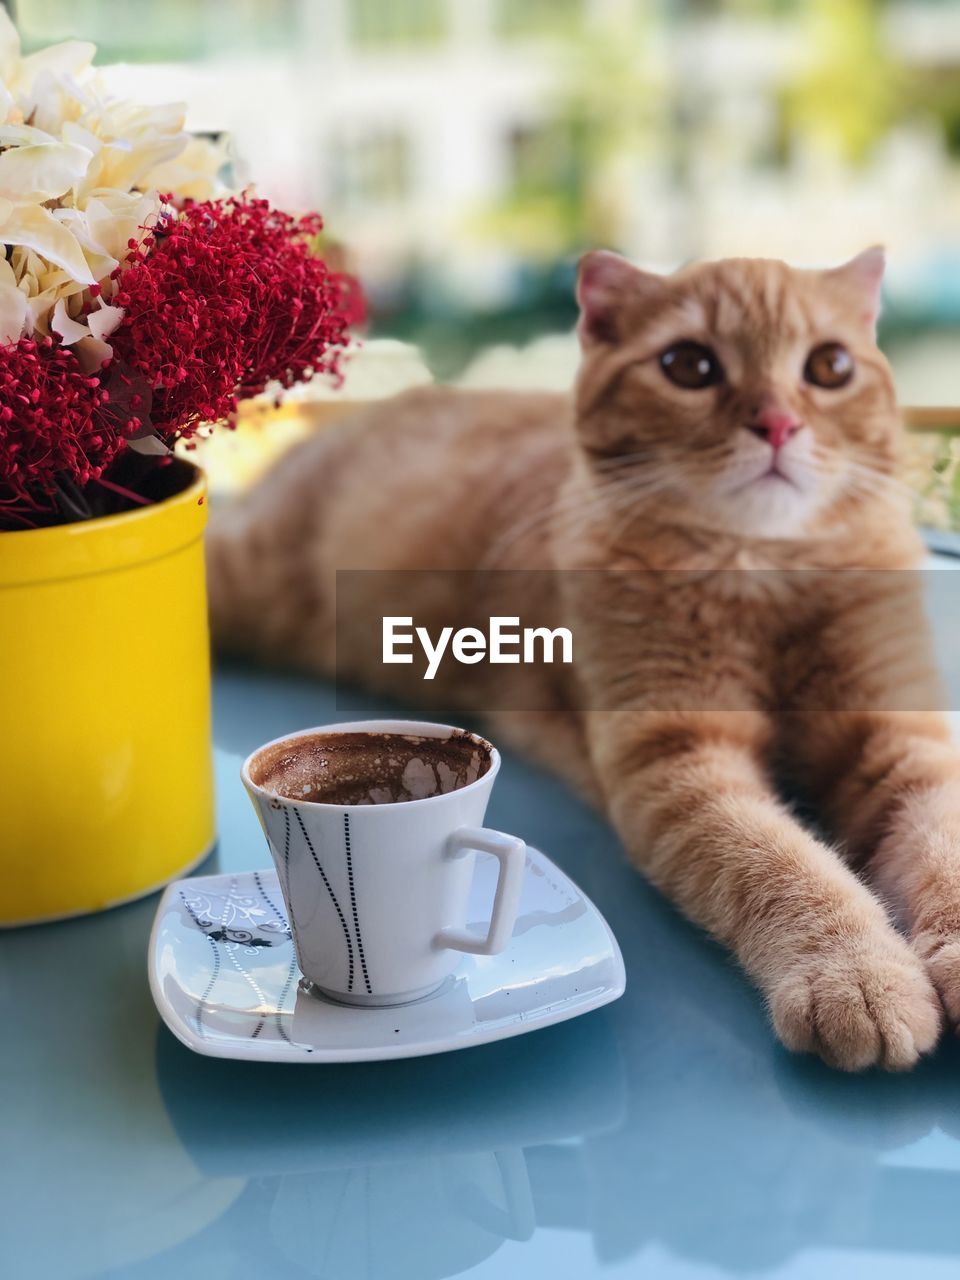 CAT WITH COFFEE CUP ON TABLE